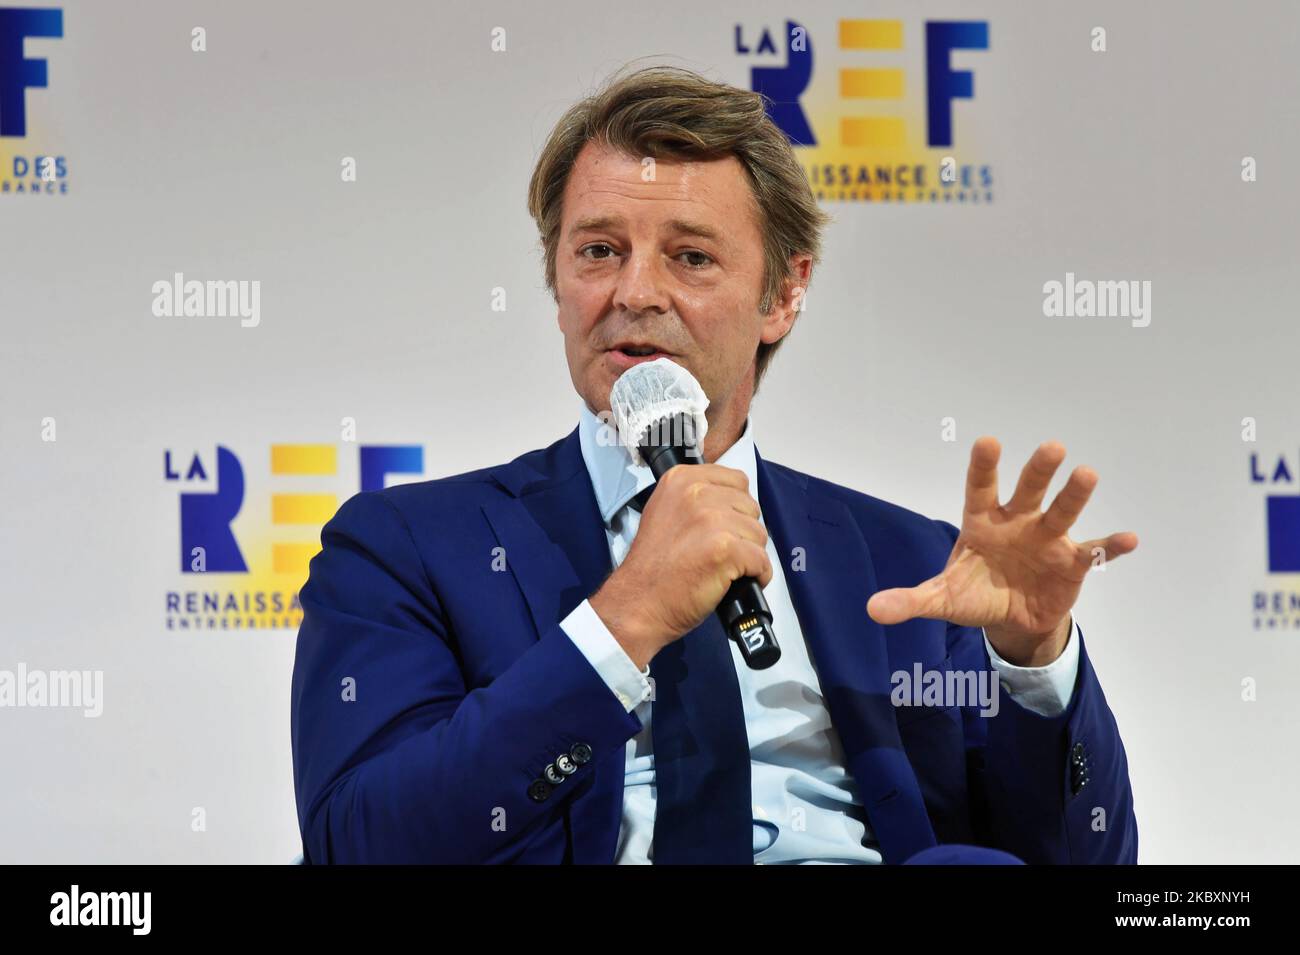 President of the French Mayors Association Francois Baroin attends at the meeting of French employers' association Medef themed 'The Renaissance of French Companies' on August 27, 2020, in Paris, France. (Photo by Daniel Pier/NurPhoto) Stock Photo